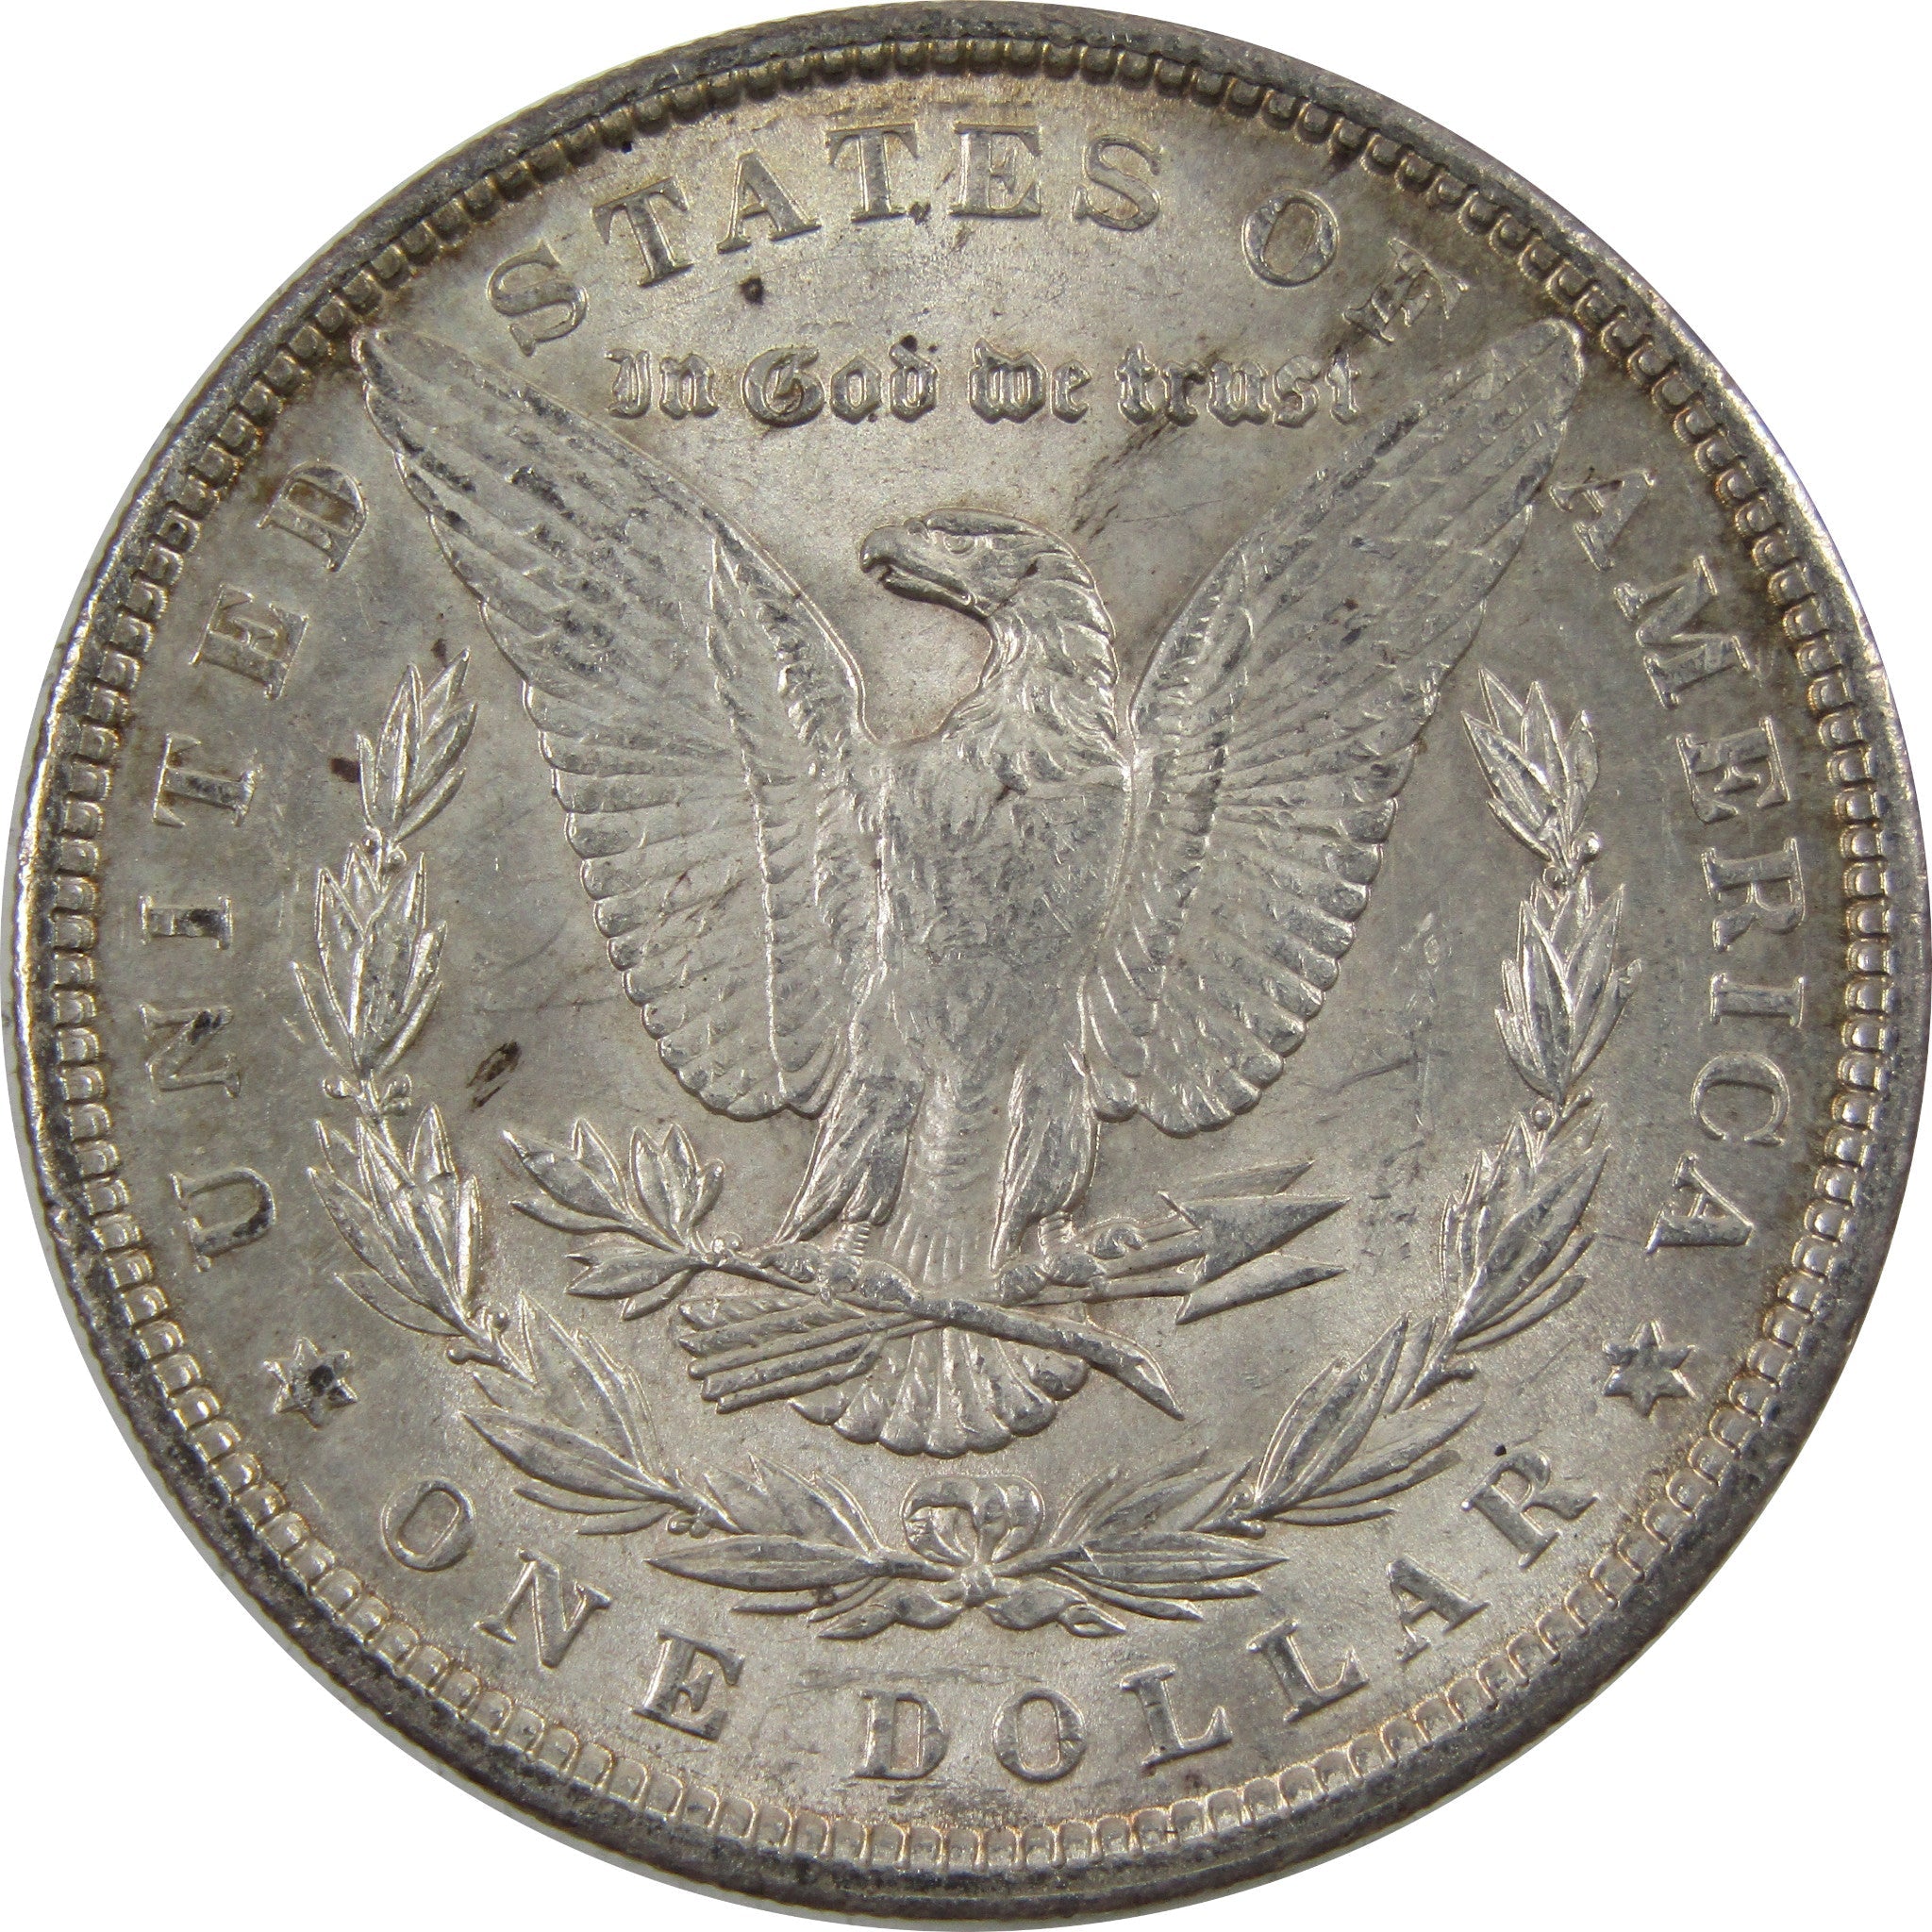 1900 Morgan Dollar AU About Uncirculated 90% Silver $1 Coin SKU:I5495 - Morgan coin - Morgan silver dollar - Morgan silver dollar for sale - Profile Coins &amp; Collectibles